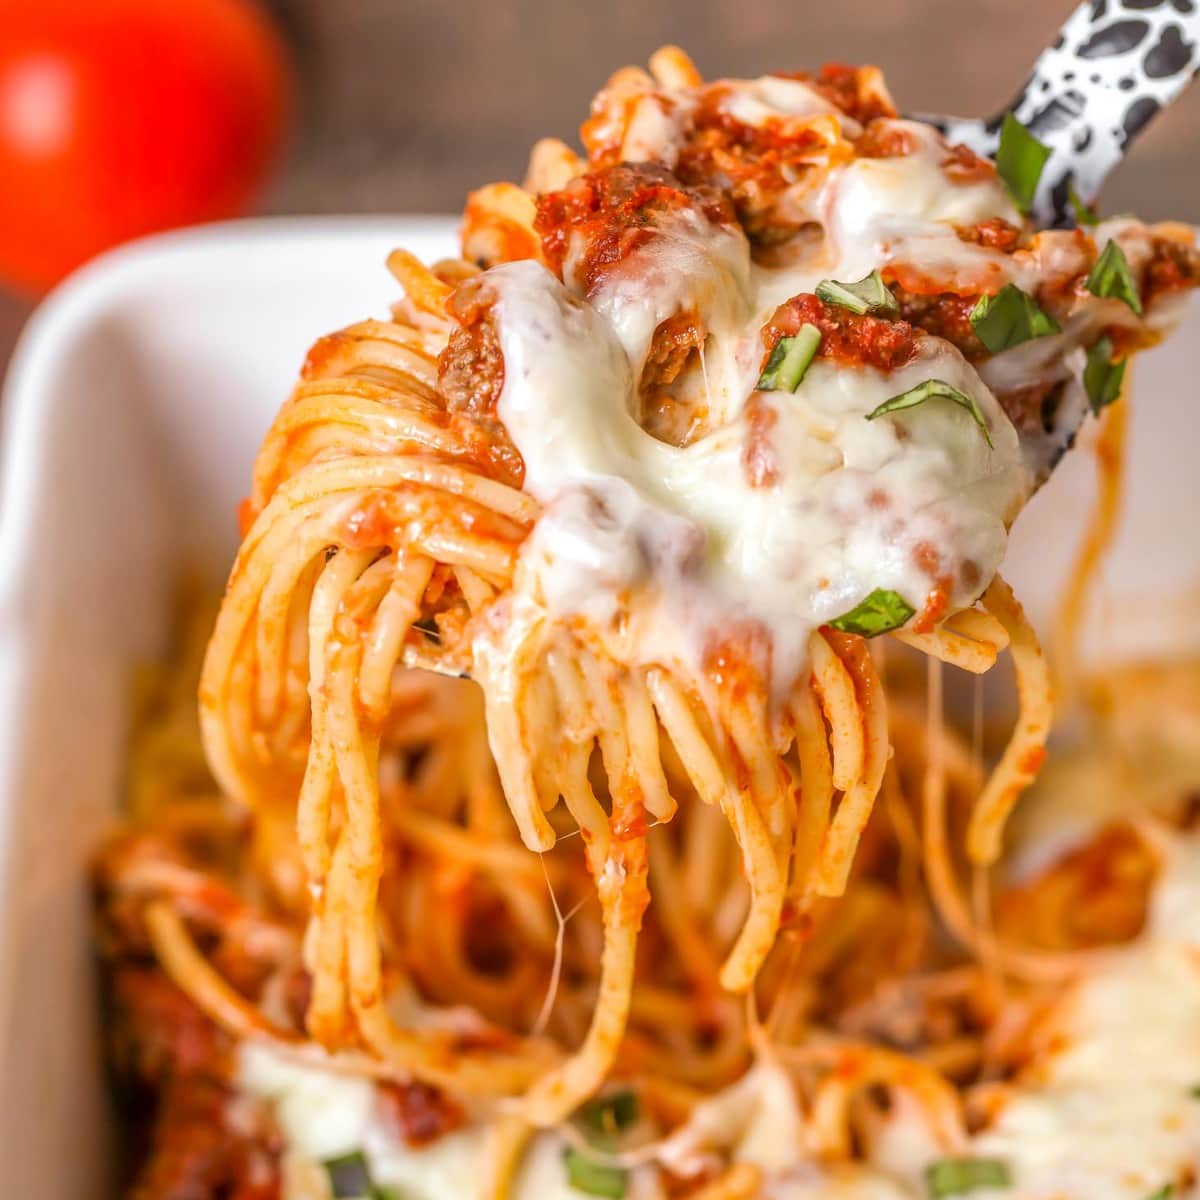 Baked spaghetti being scooped out of a dish with a serving spoon.